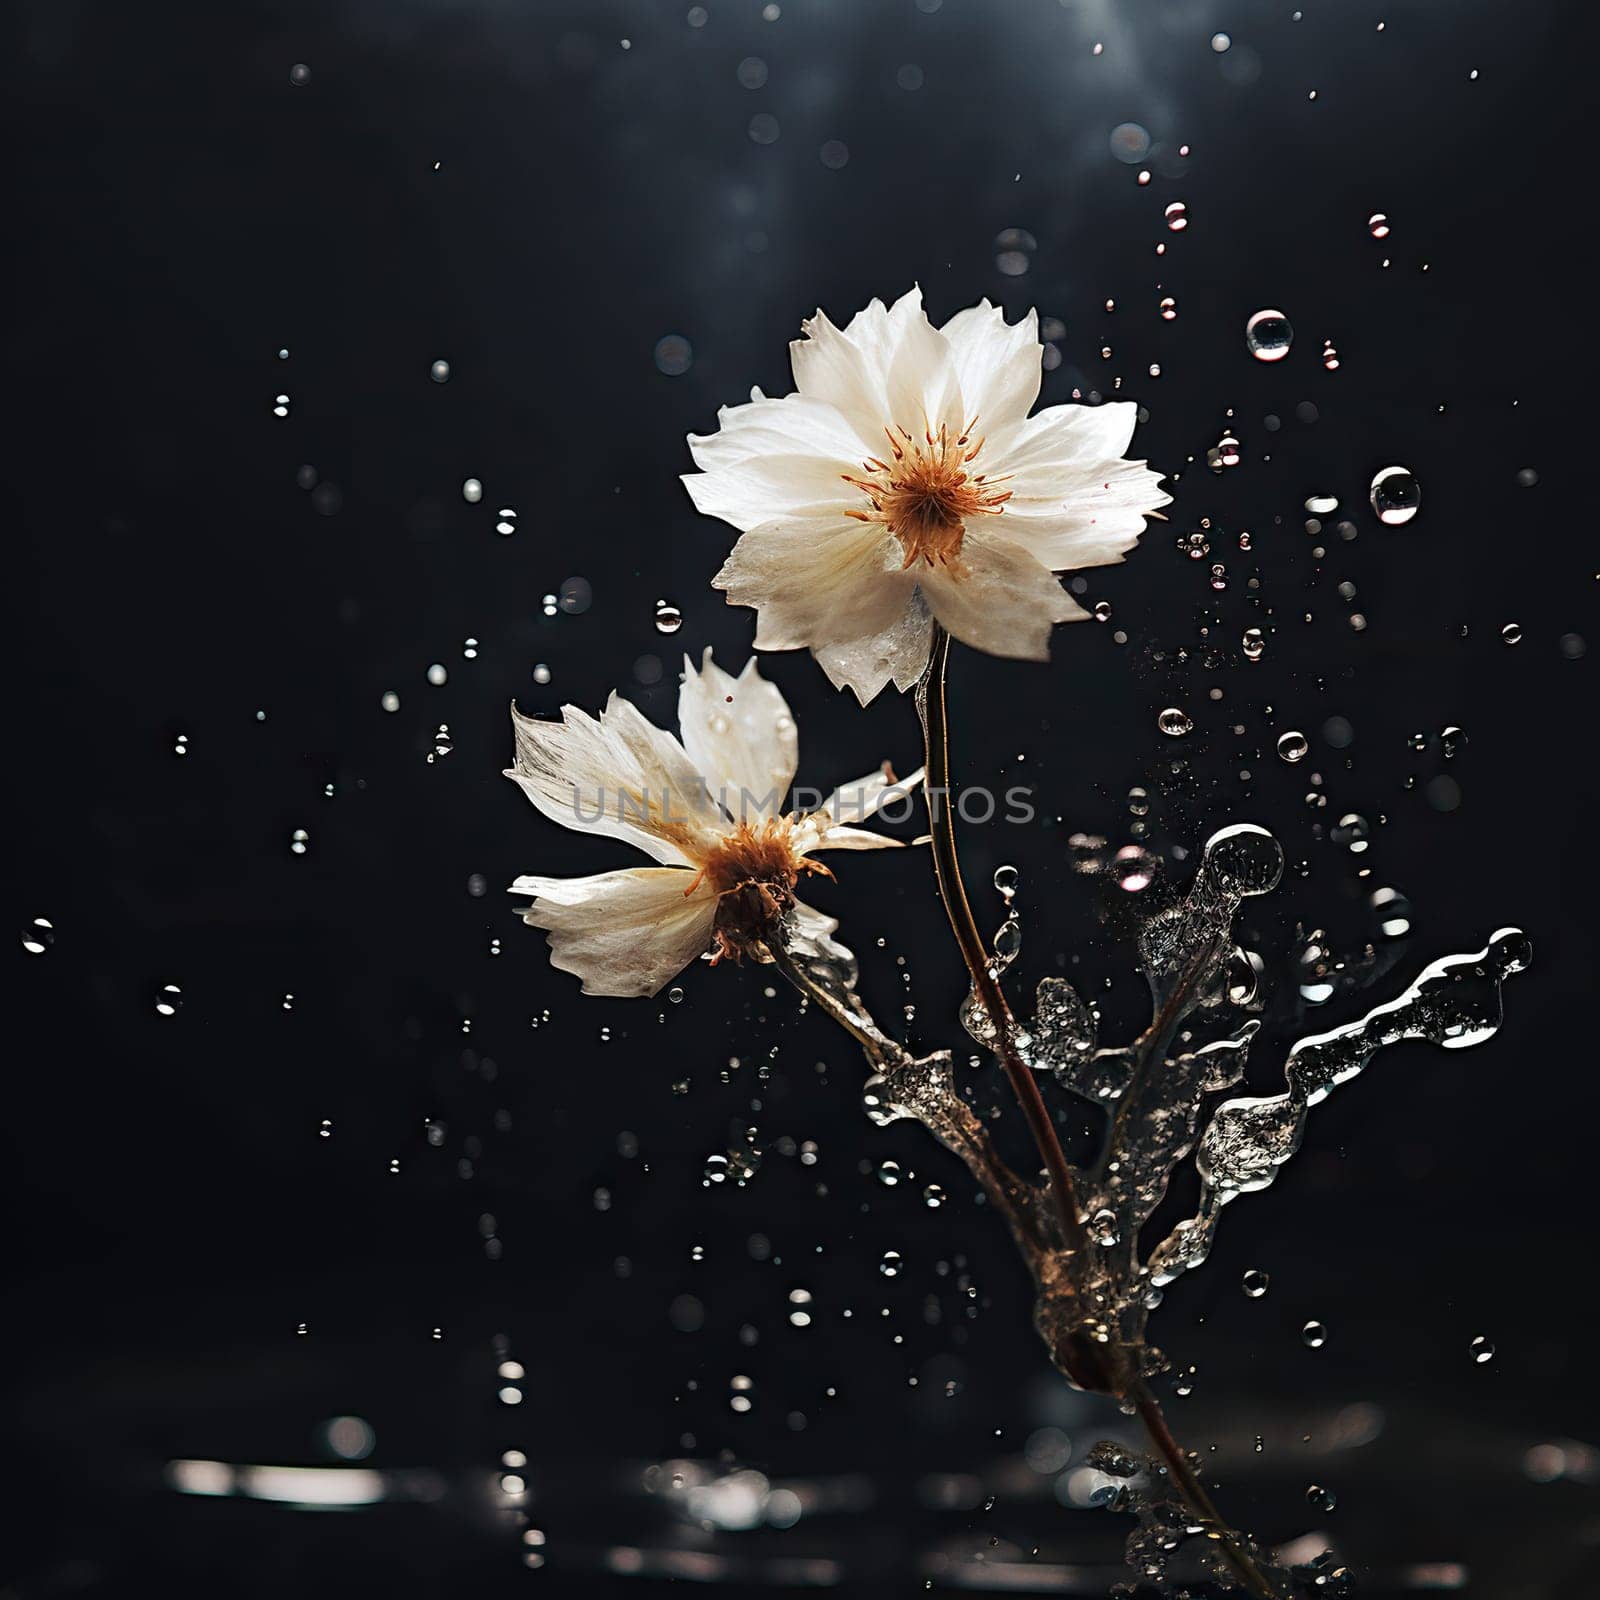 Branch with white flowers in splashes of water, isolated on a black background.